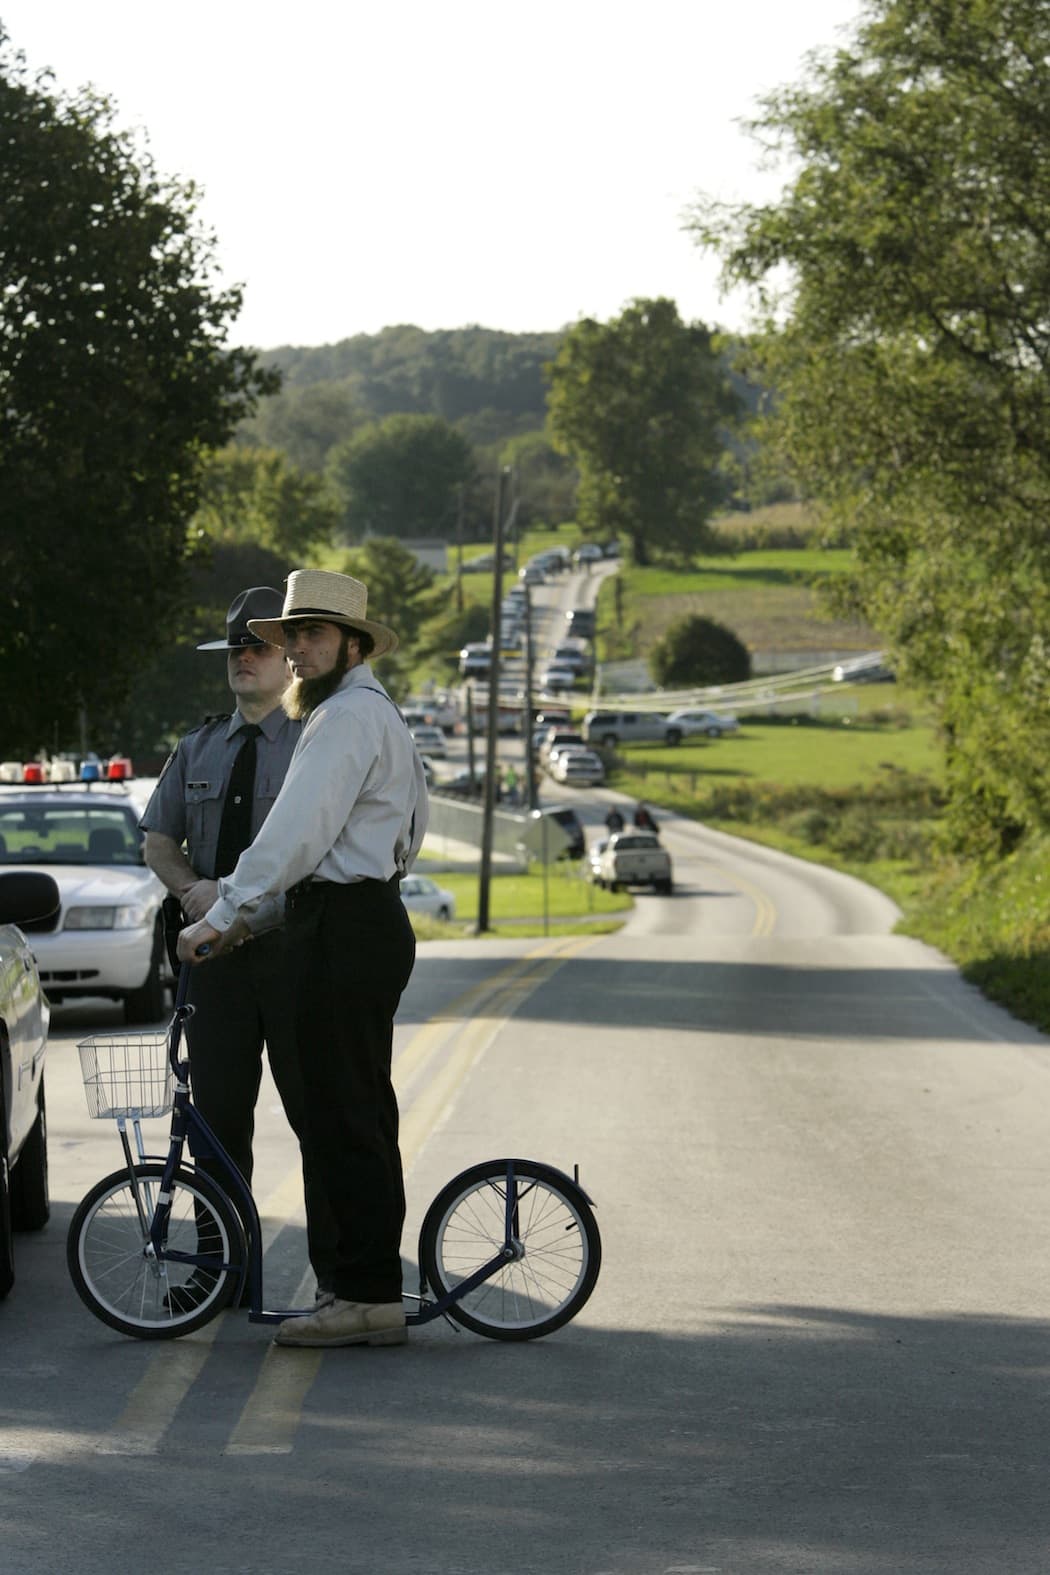 An Amish man talks to a police officer standing guard at the intersection leading to the site of the schoolhouse shooting in Nickel Mine, Pa. (Mary Altaffer/AP)